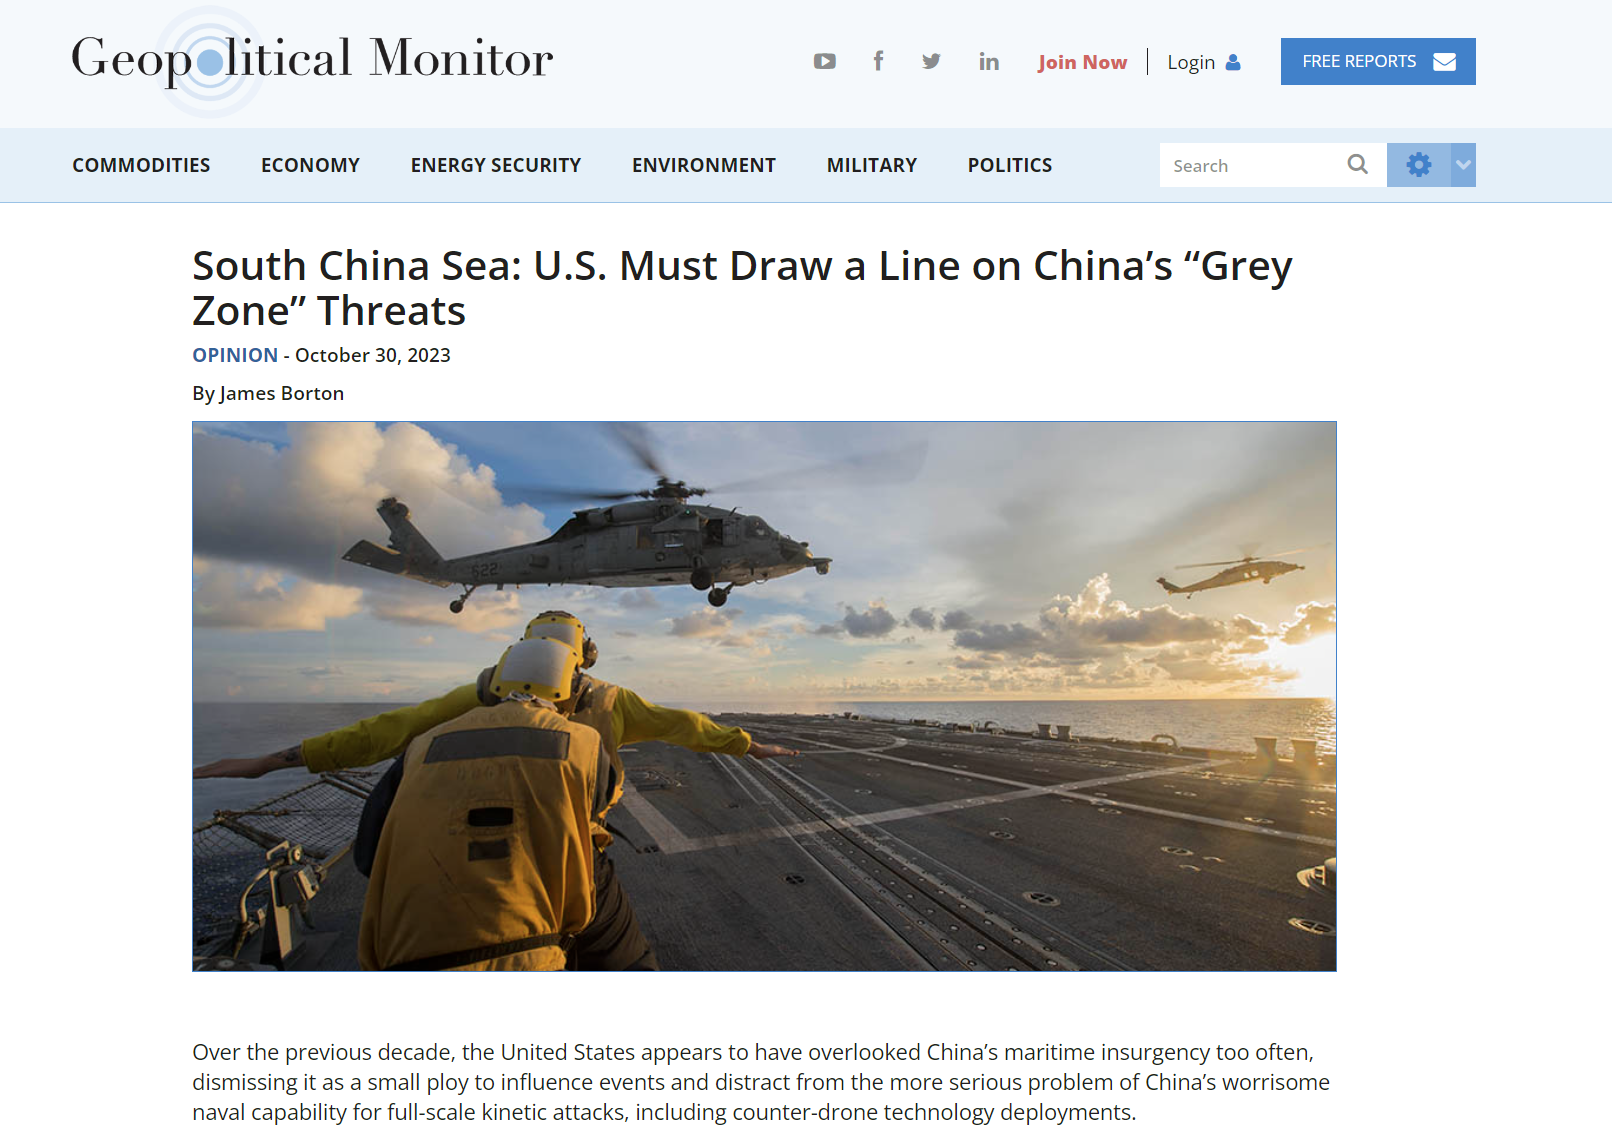 Geopolitical Monitor: South China Sea: U.S. Must Draw a Line on China’s “Gray Zone” Threats